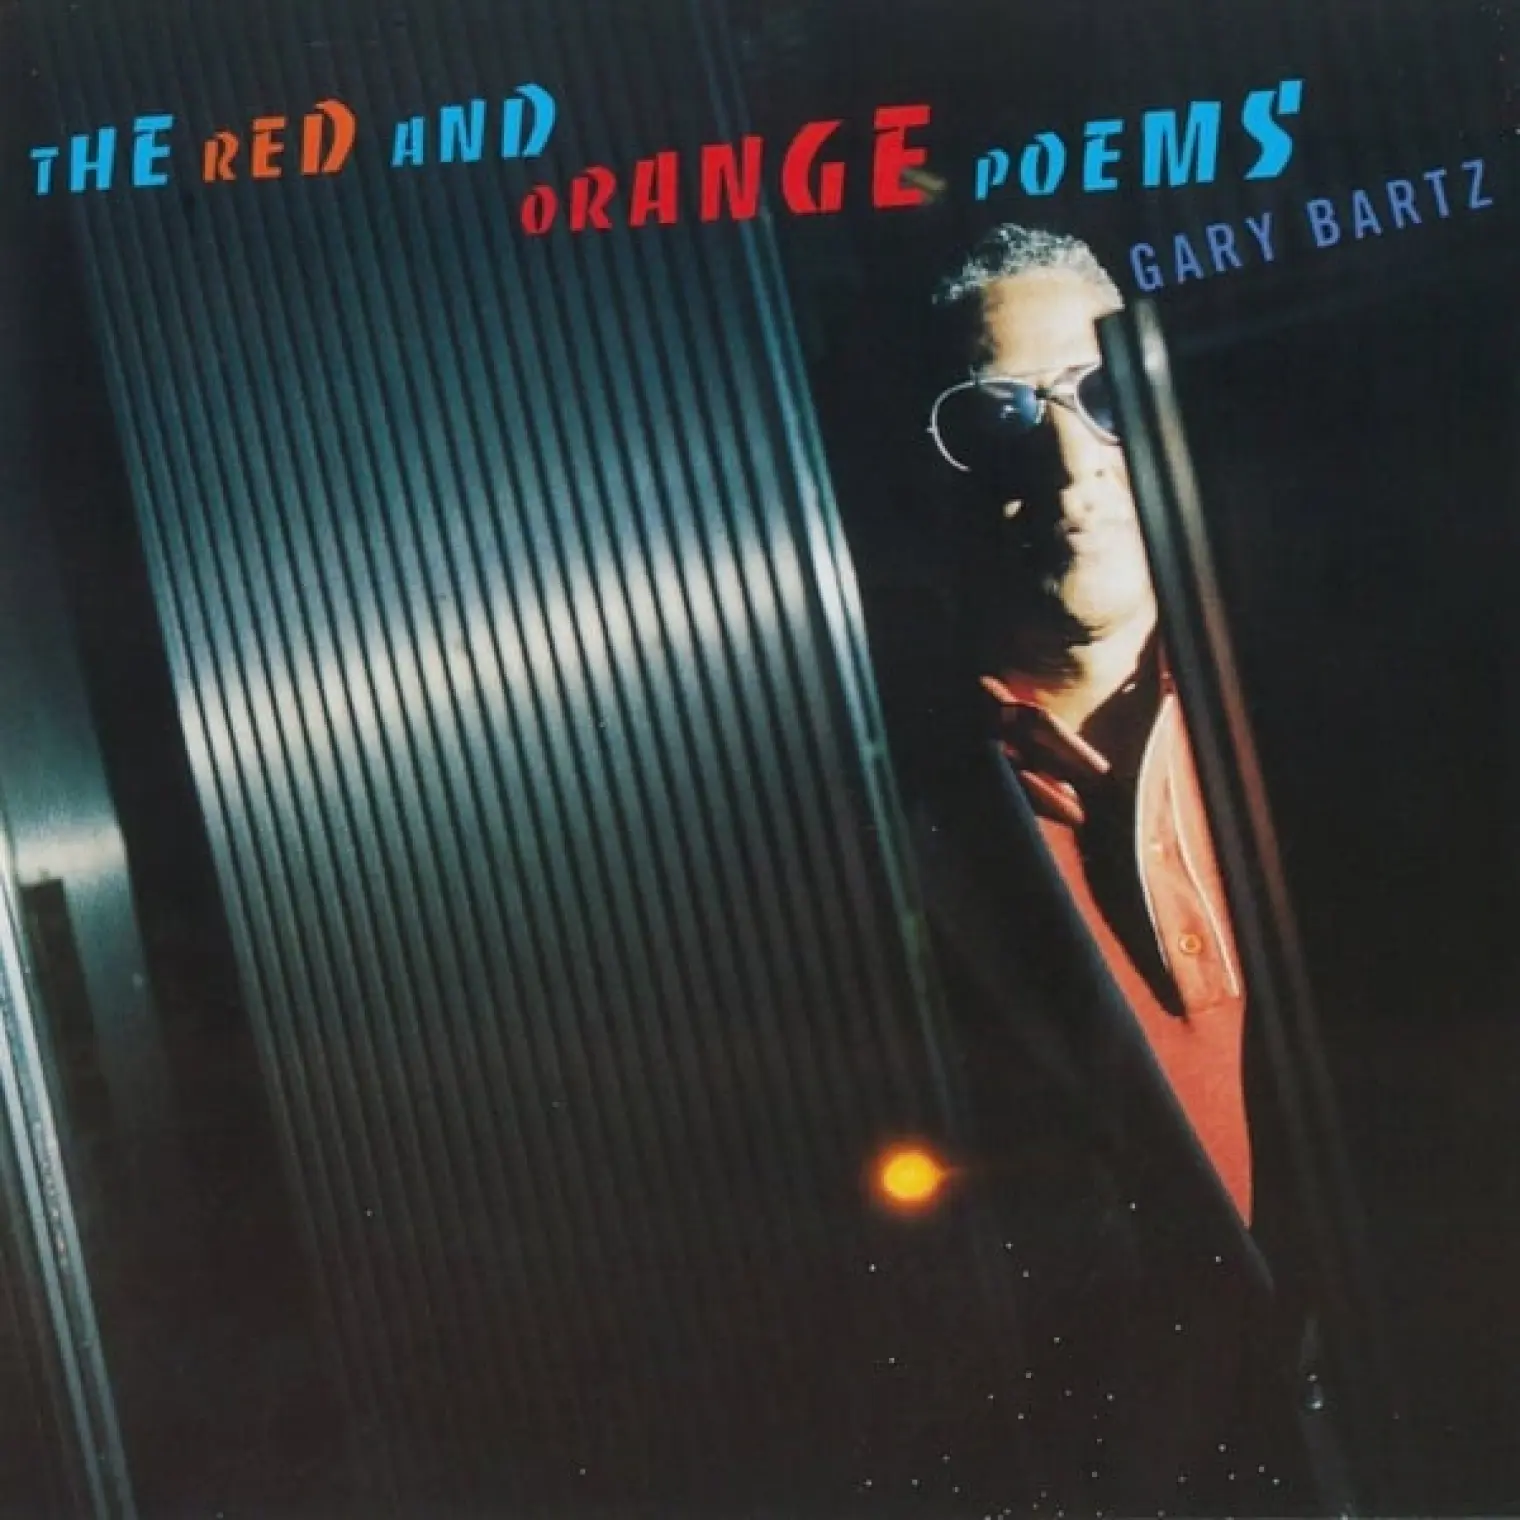 The Red And Orange Poems -  Gary Bartz 